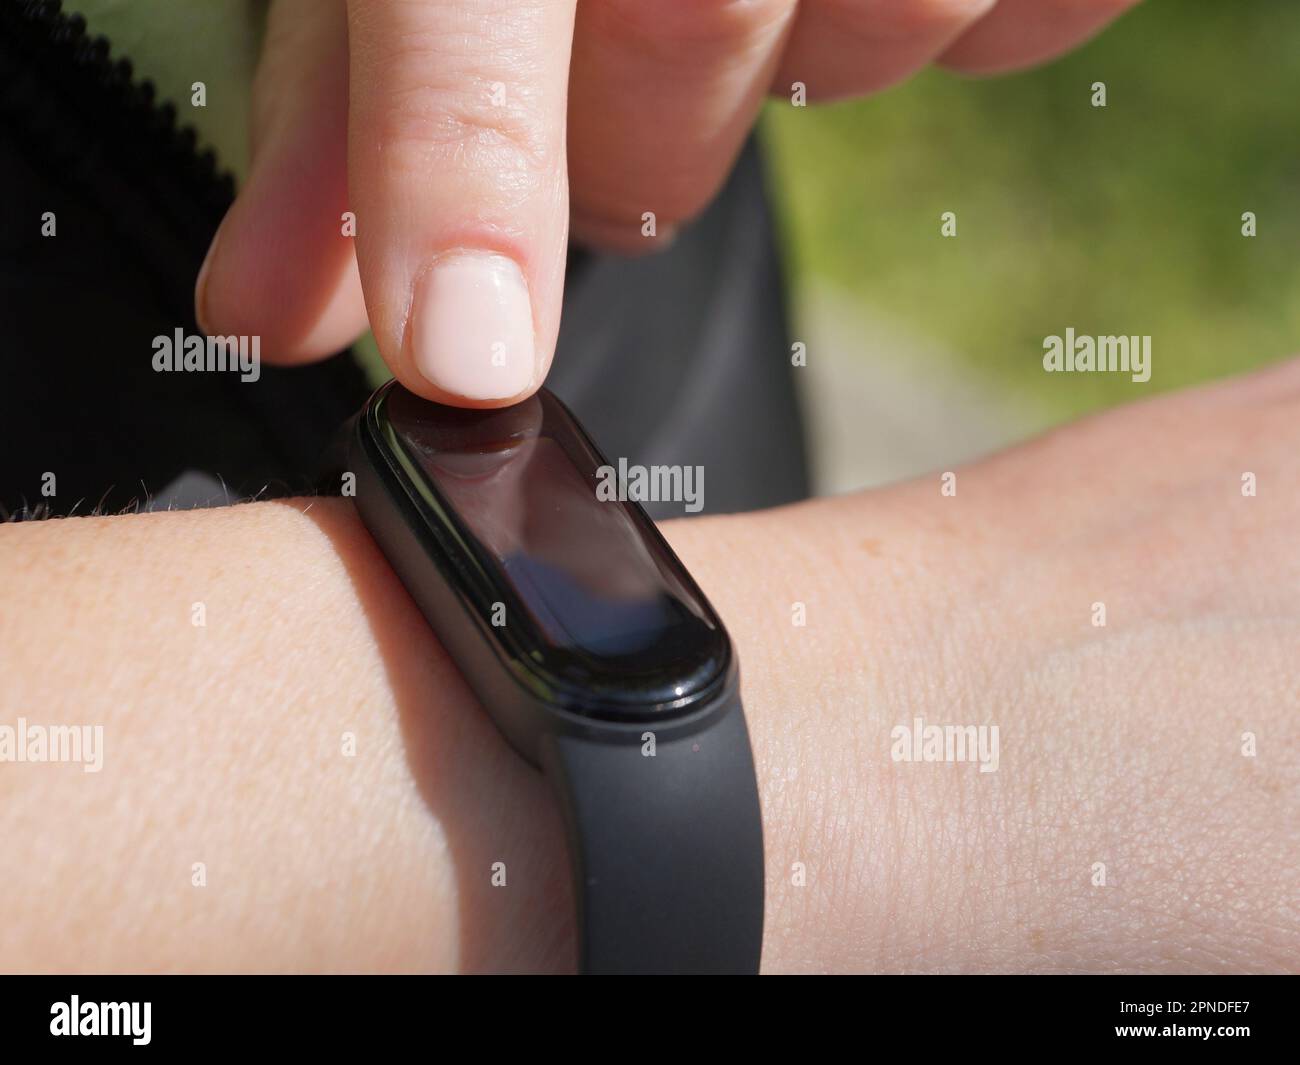 Using a fitness bracelet, a woman measures her pulse on the display of a fitness bracelet close-up Stock Photo